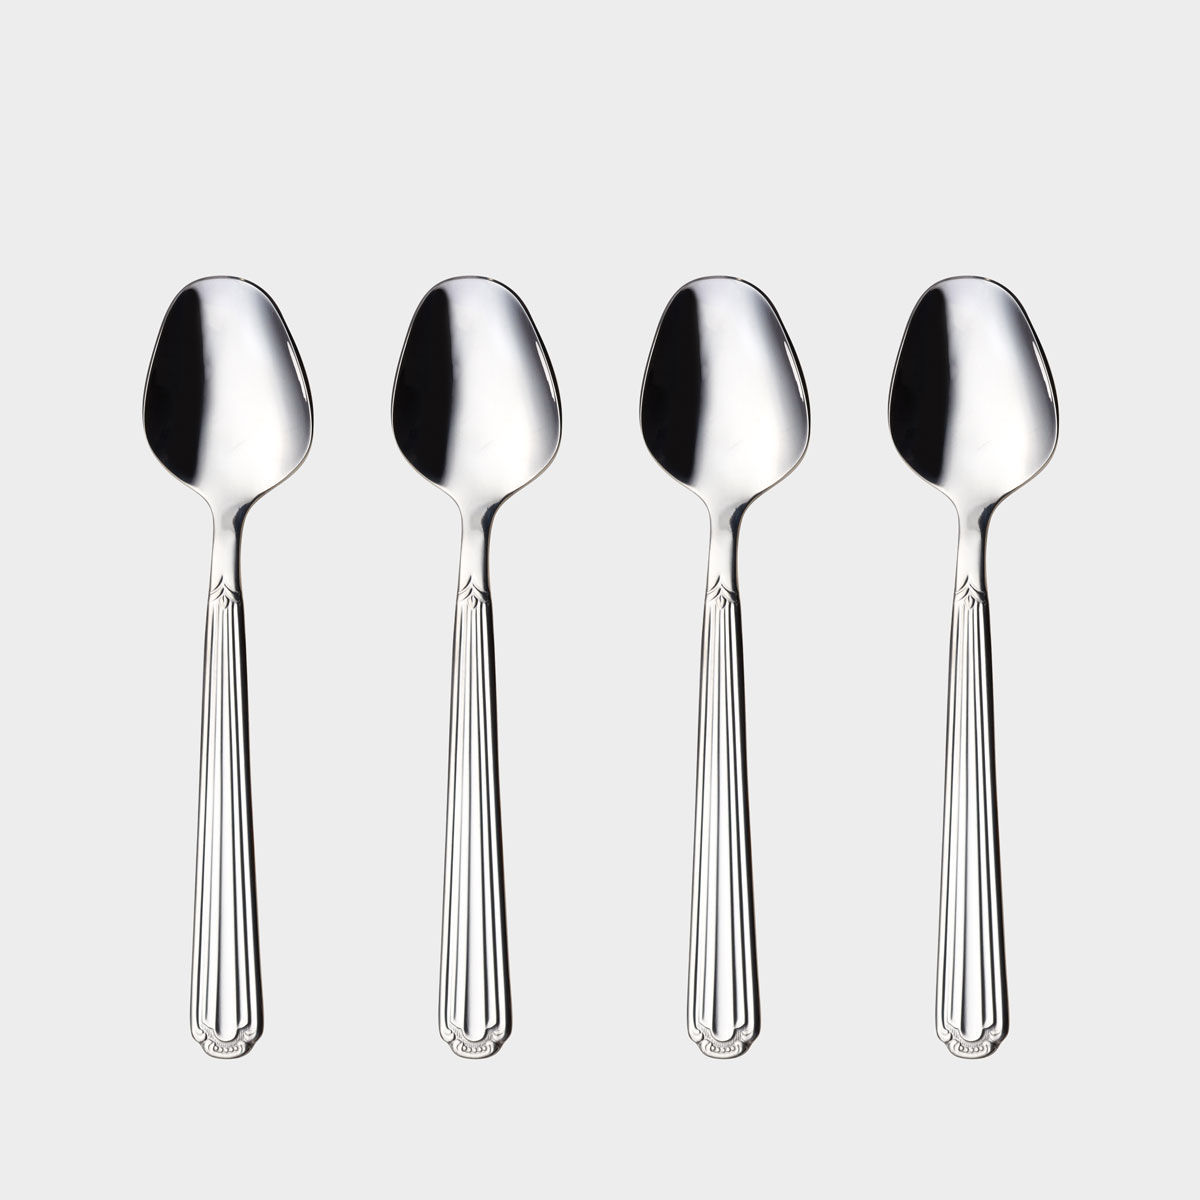 Renessanse tea spoons product image